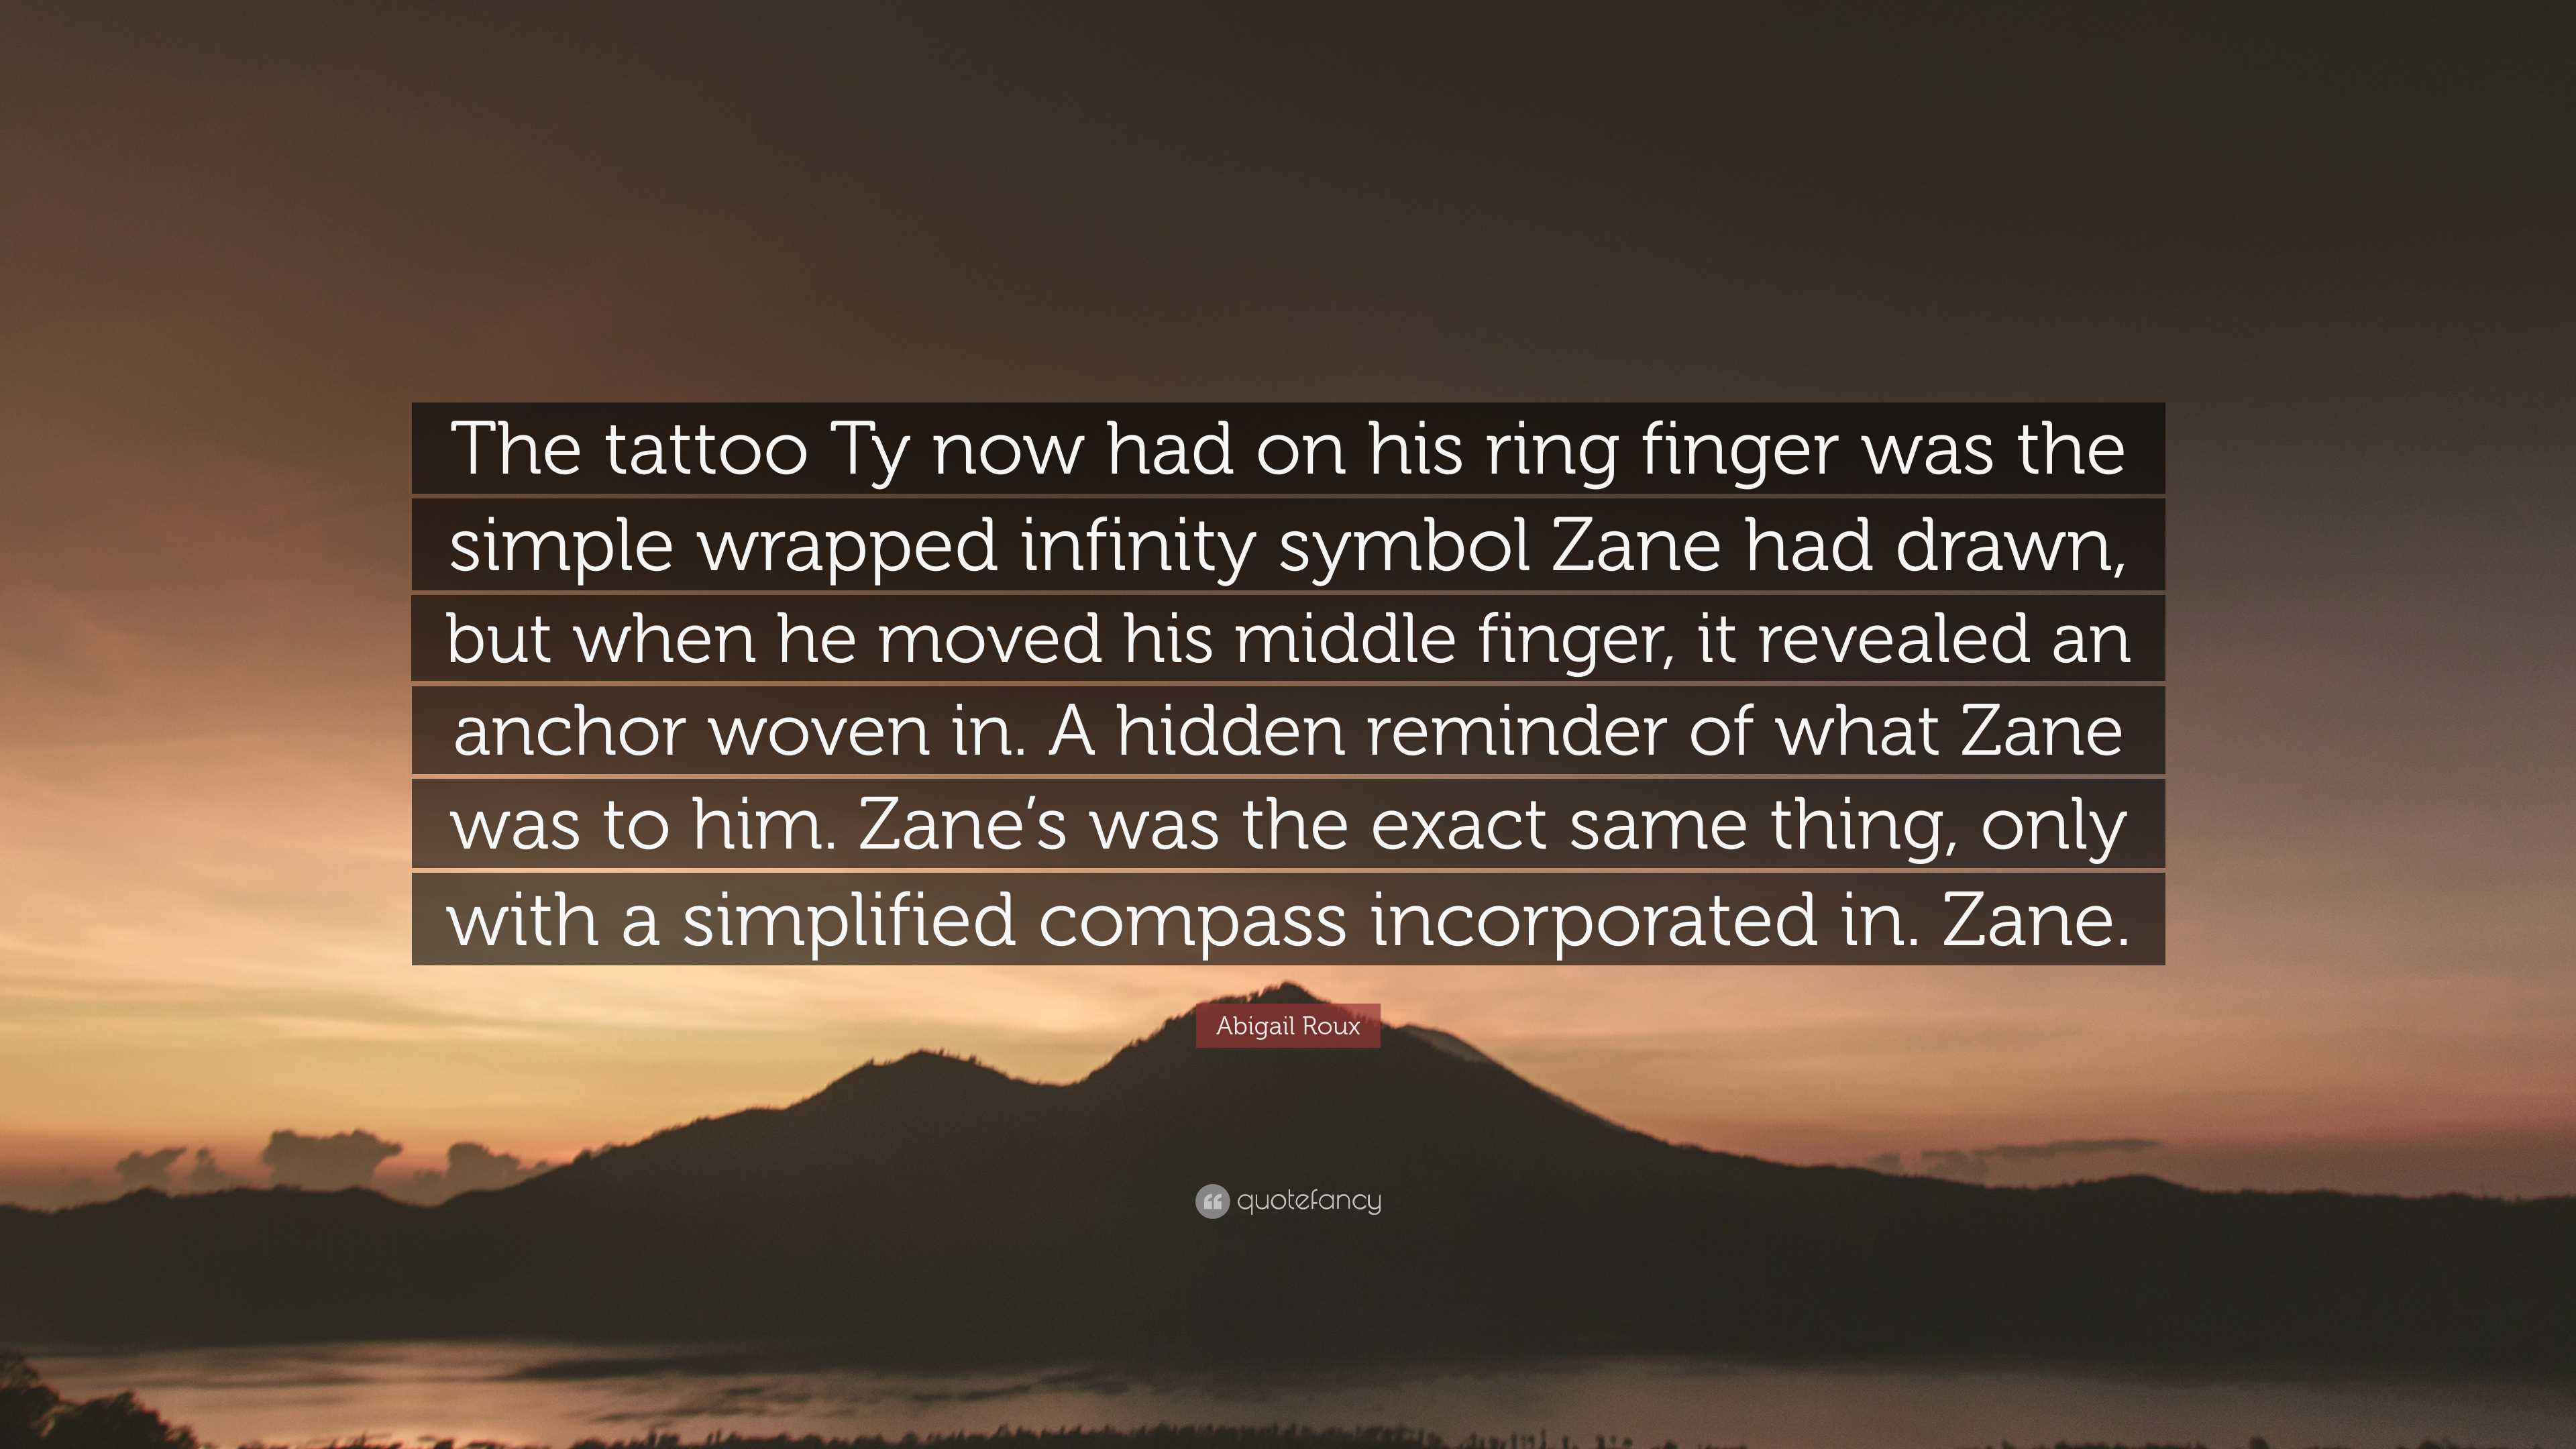 7853083 Abigail Roux Quote The tattoo Ty now had on his ring finger was